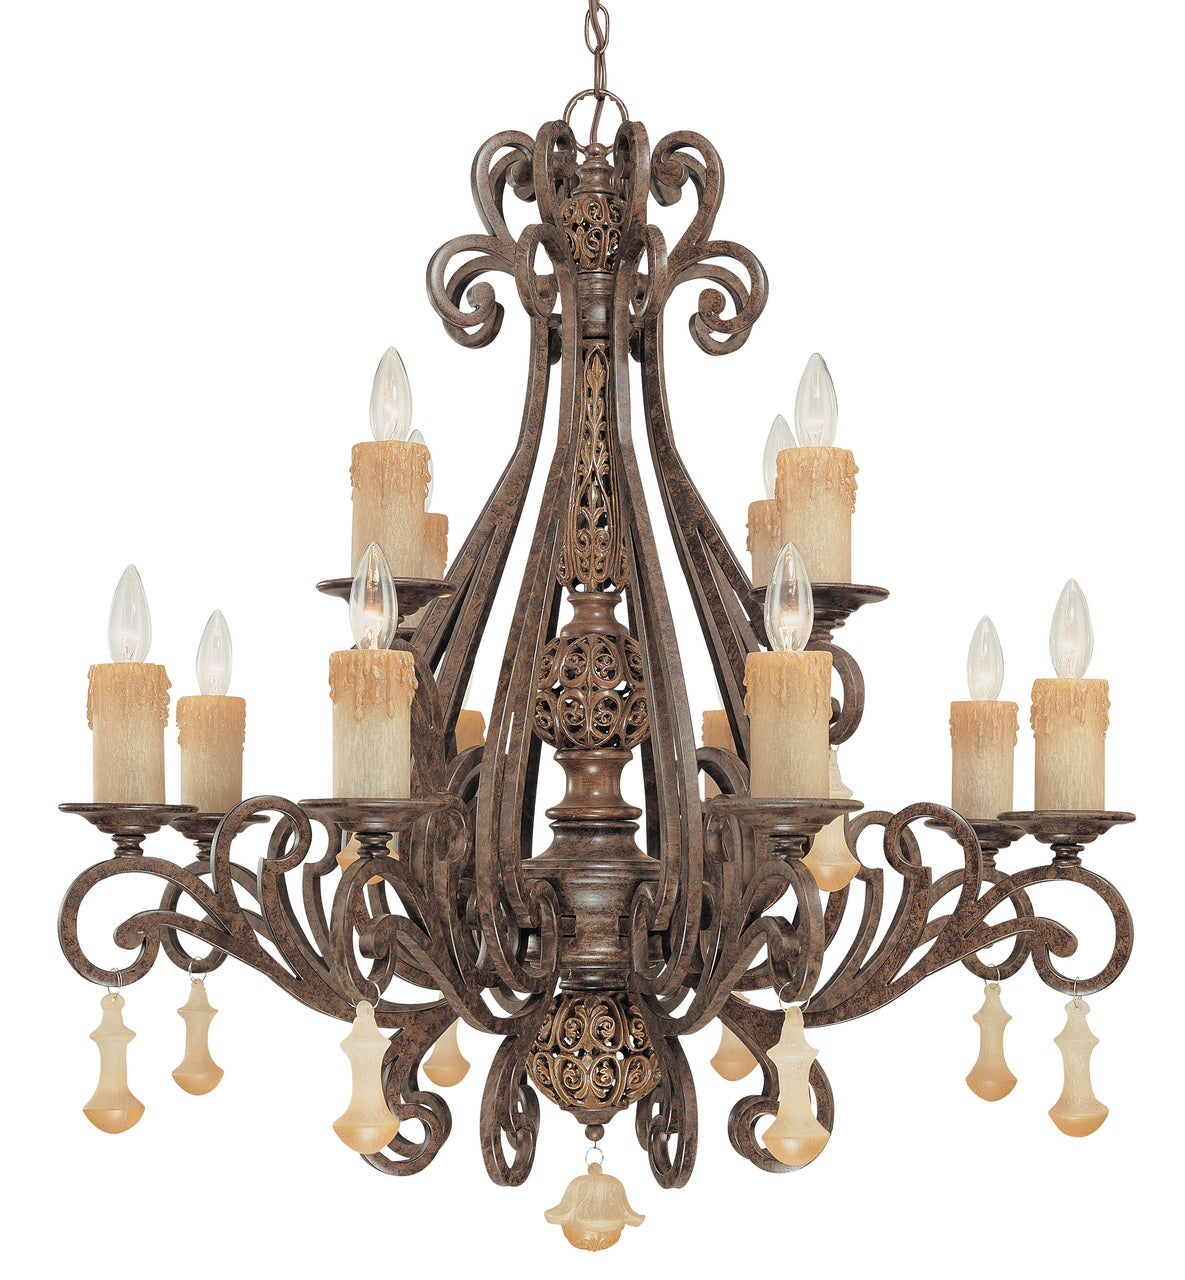 Classic Lighting 71158 TS Riviera Wrought Iron Chandelier in Tortoise Shell